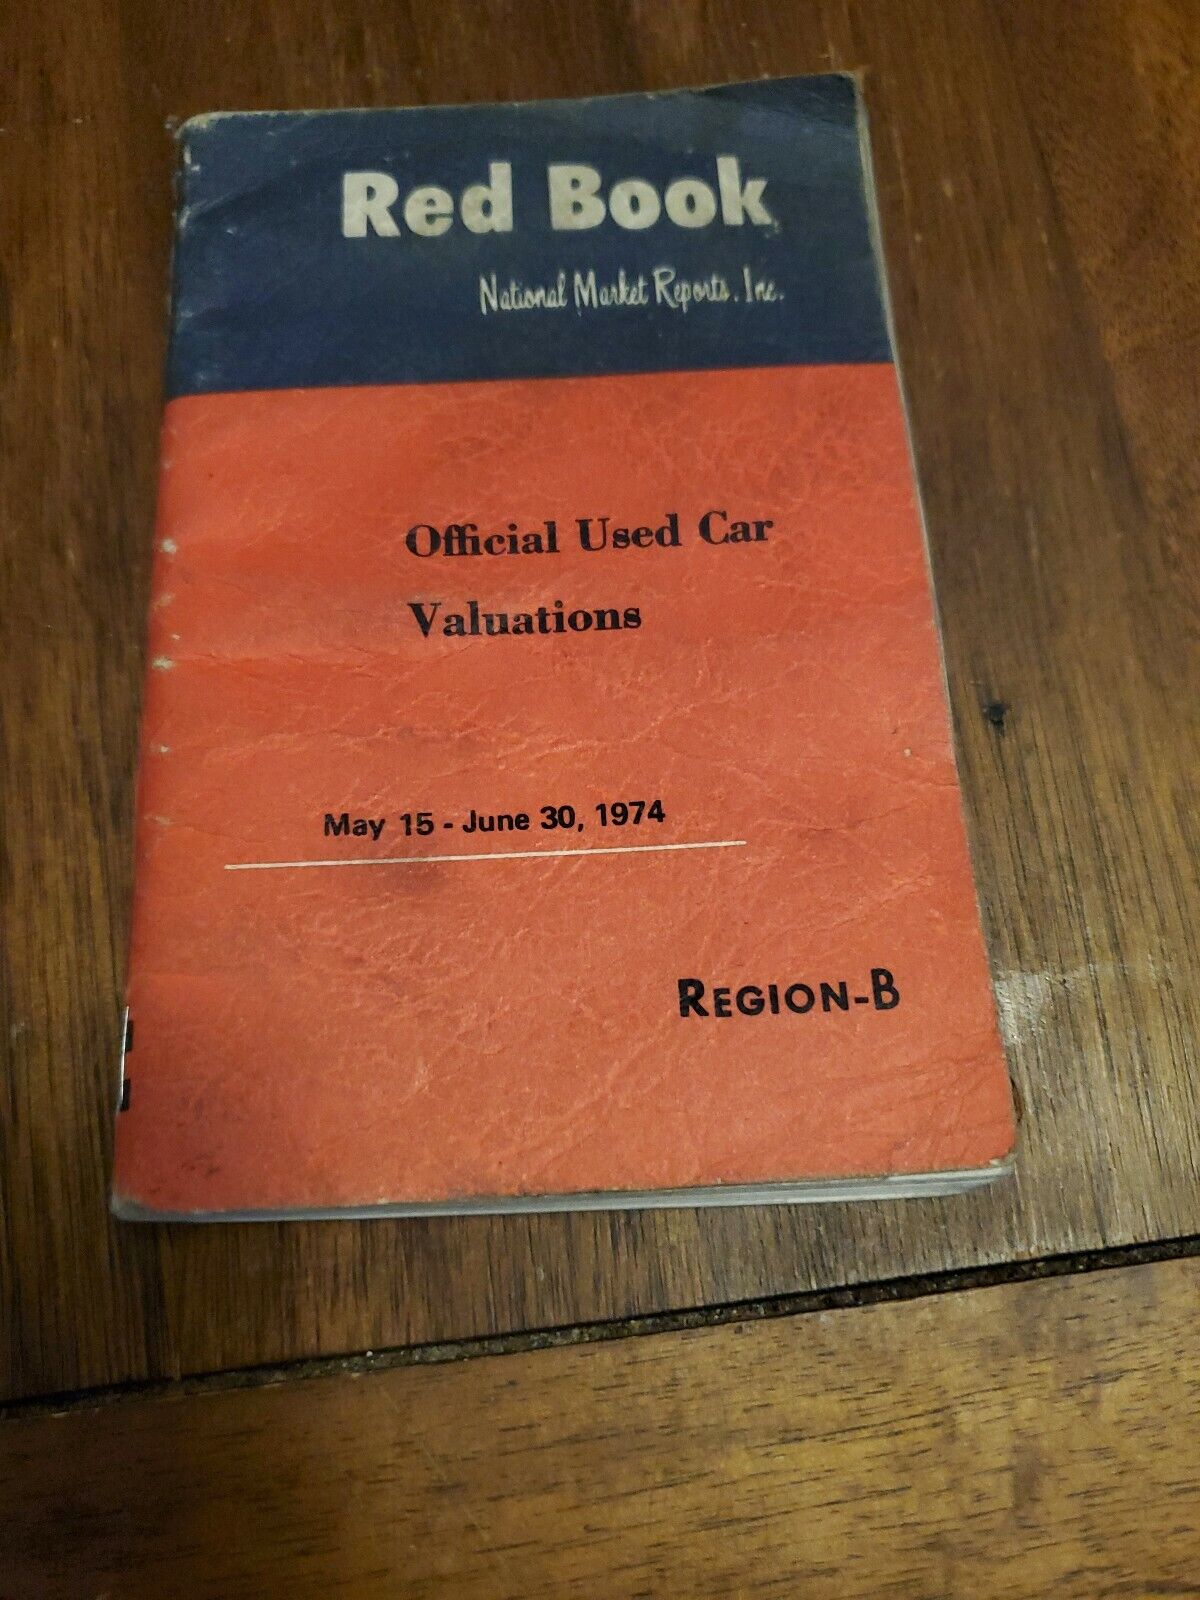 May 15 to June 30 1974 Red Book National Market Report Offical Used Car Region B